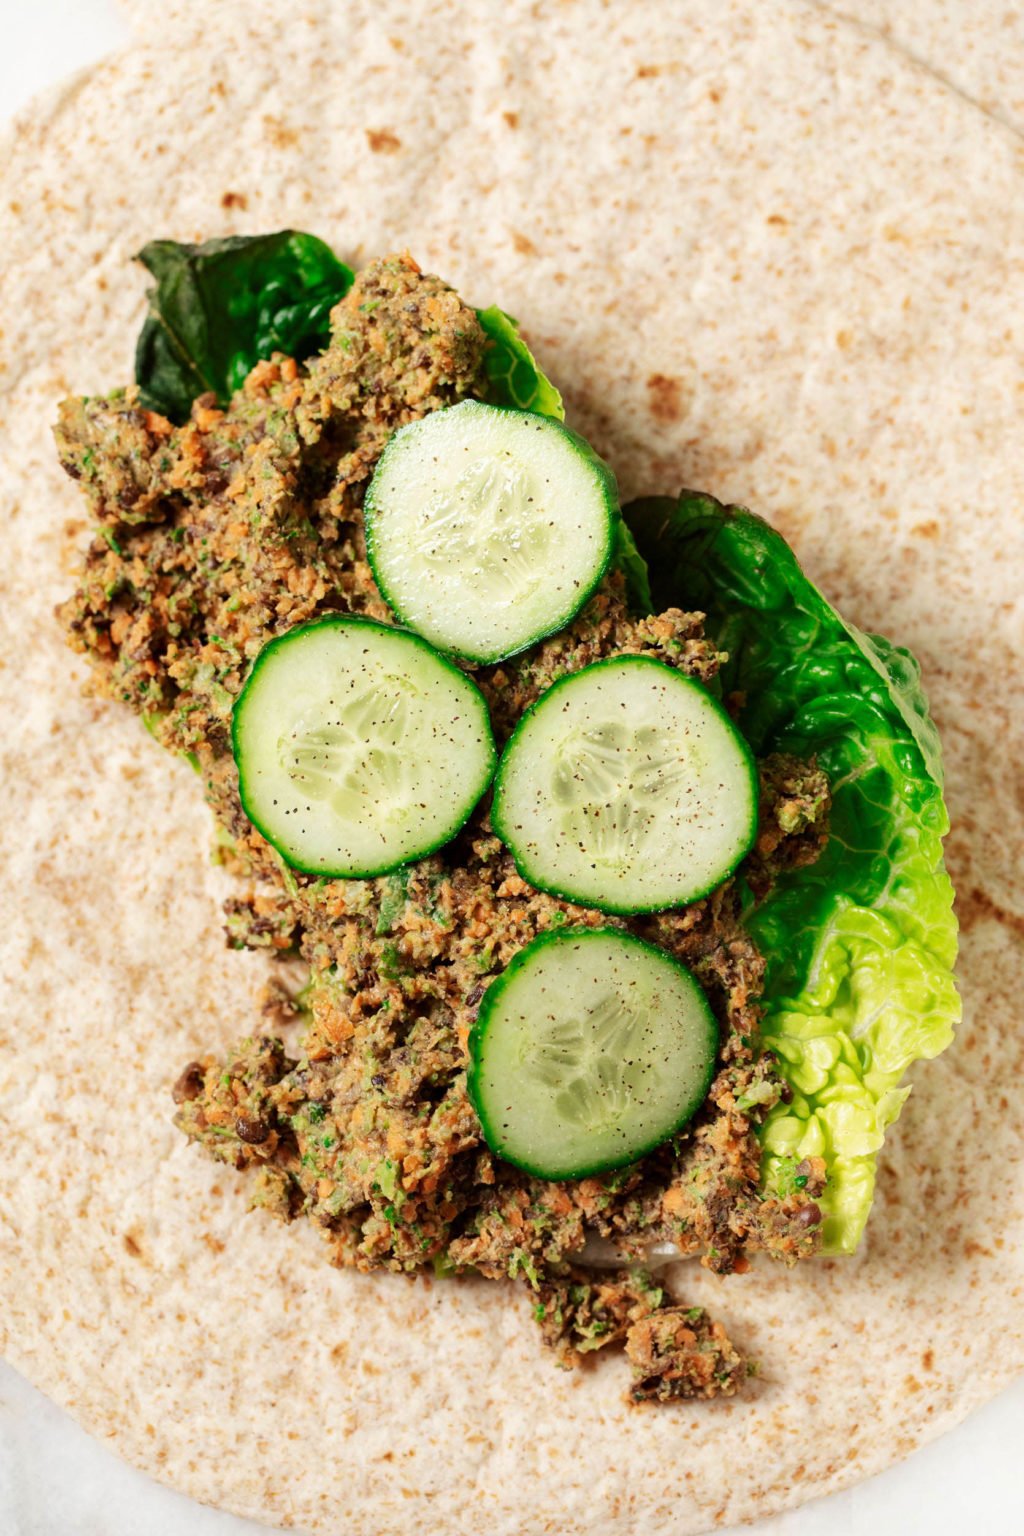 A whole grain wrap is being filled with a mixture of lentils and vegetables and some cucumber slices.